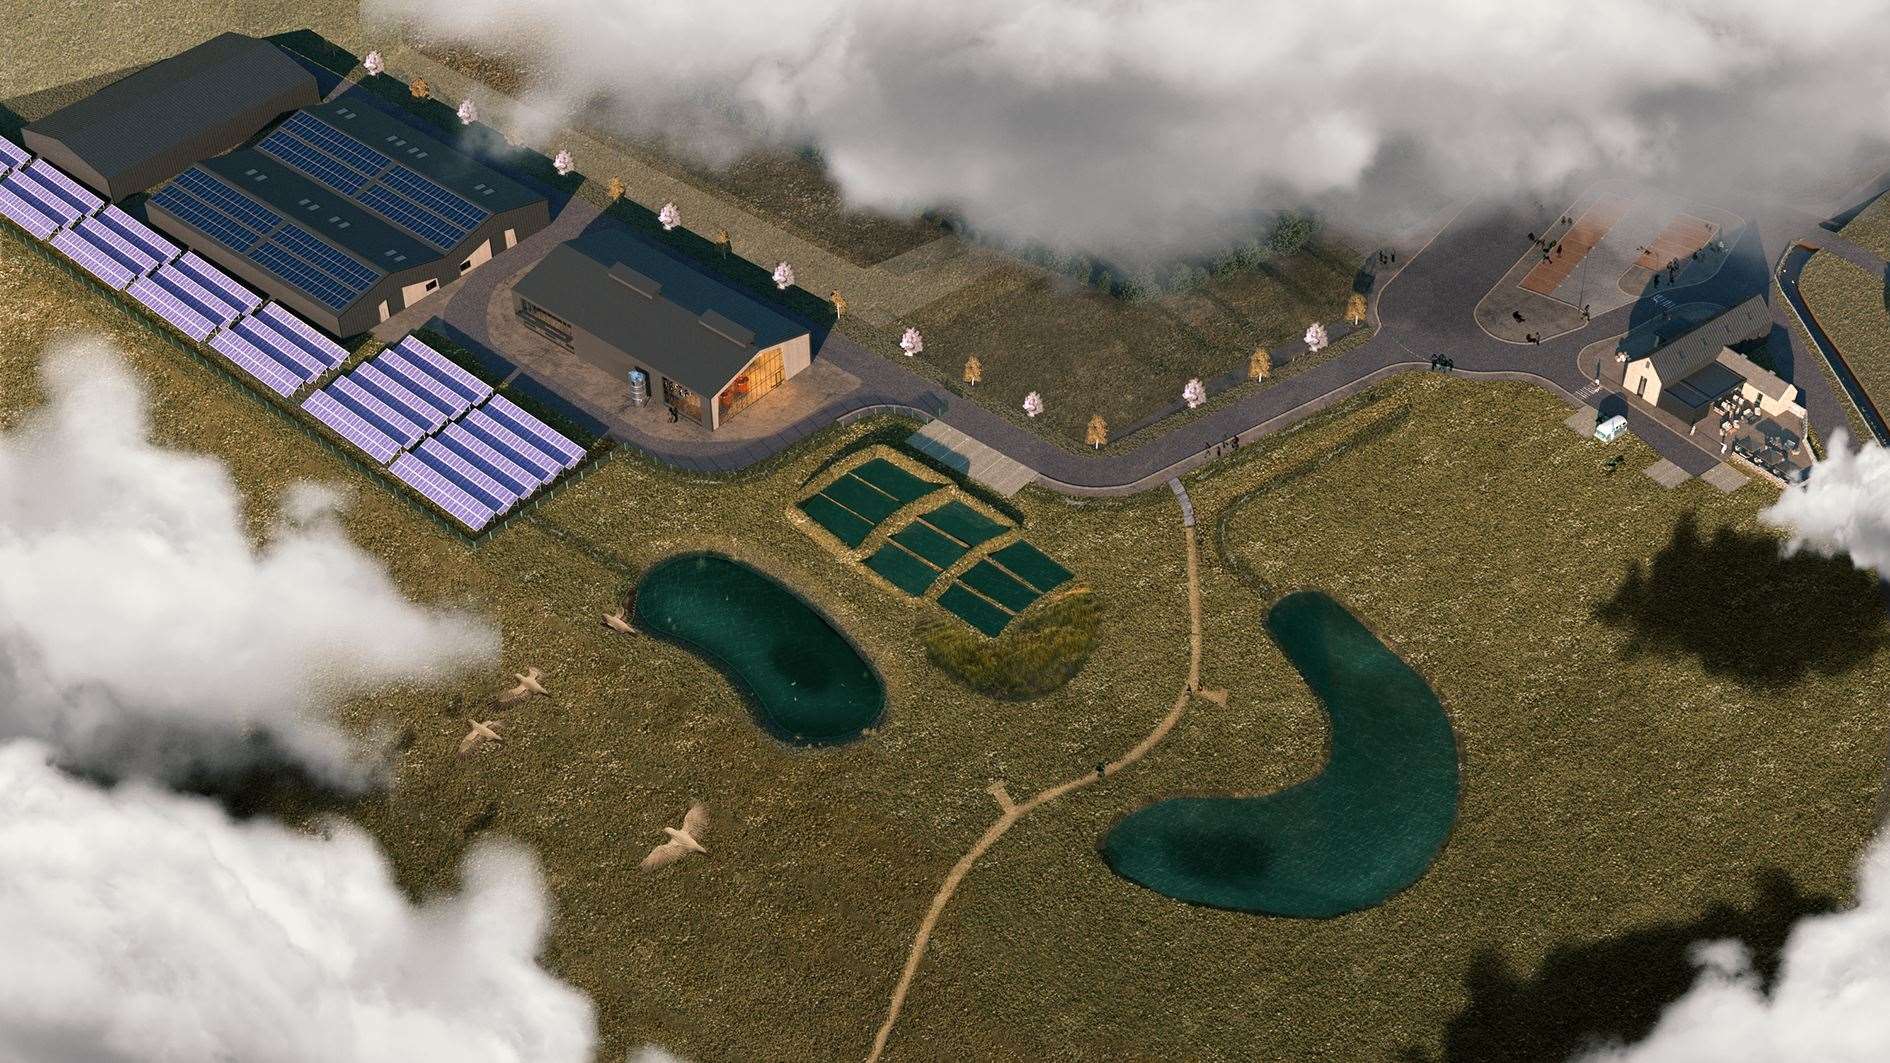 Plans include a two-storey, new whisky distillery and visitor centre at Dornoch South, along with warehouses, a low-lying solar farm and wetland system.